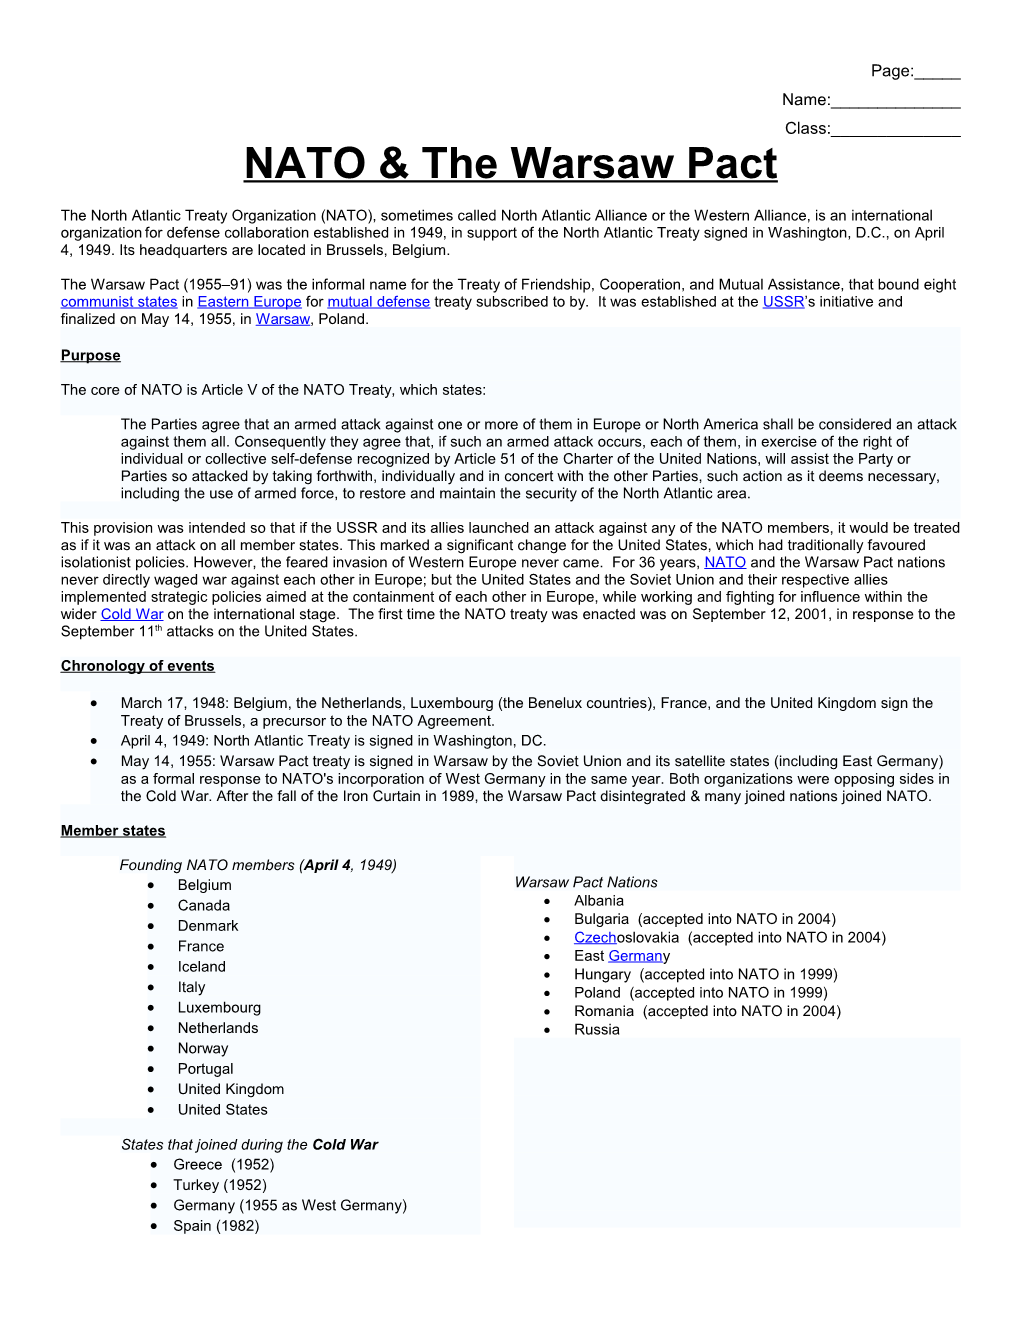 NATO & the Warsaw Pact